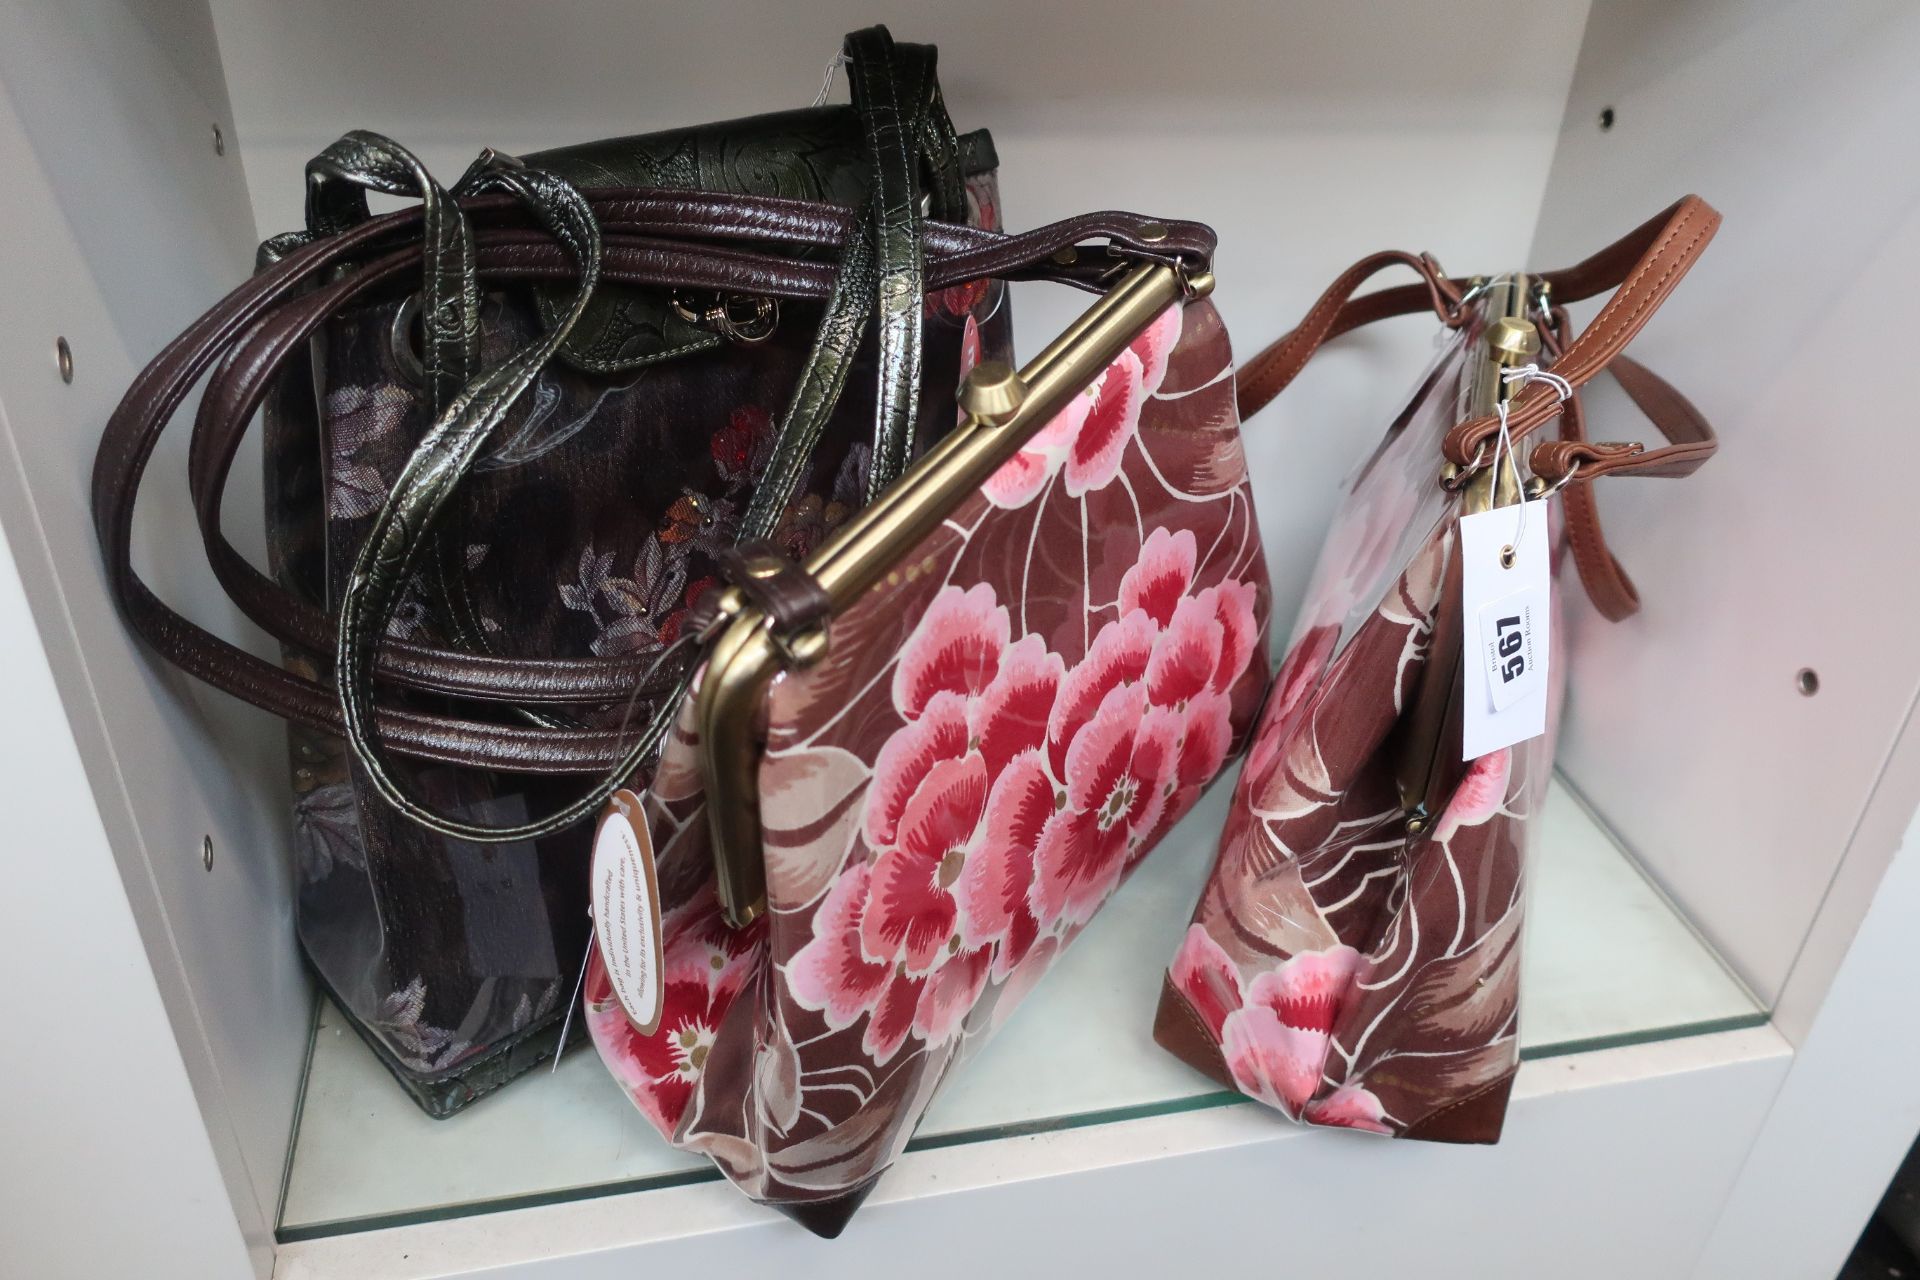 Two as new M.andonia handbags with oriental flower design and one M.andonia handbag with flower